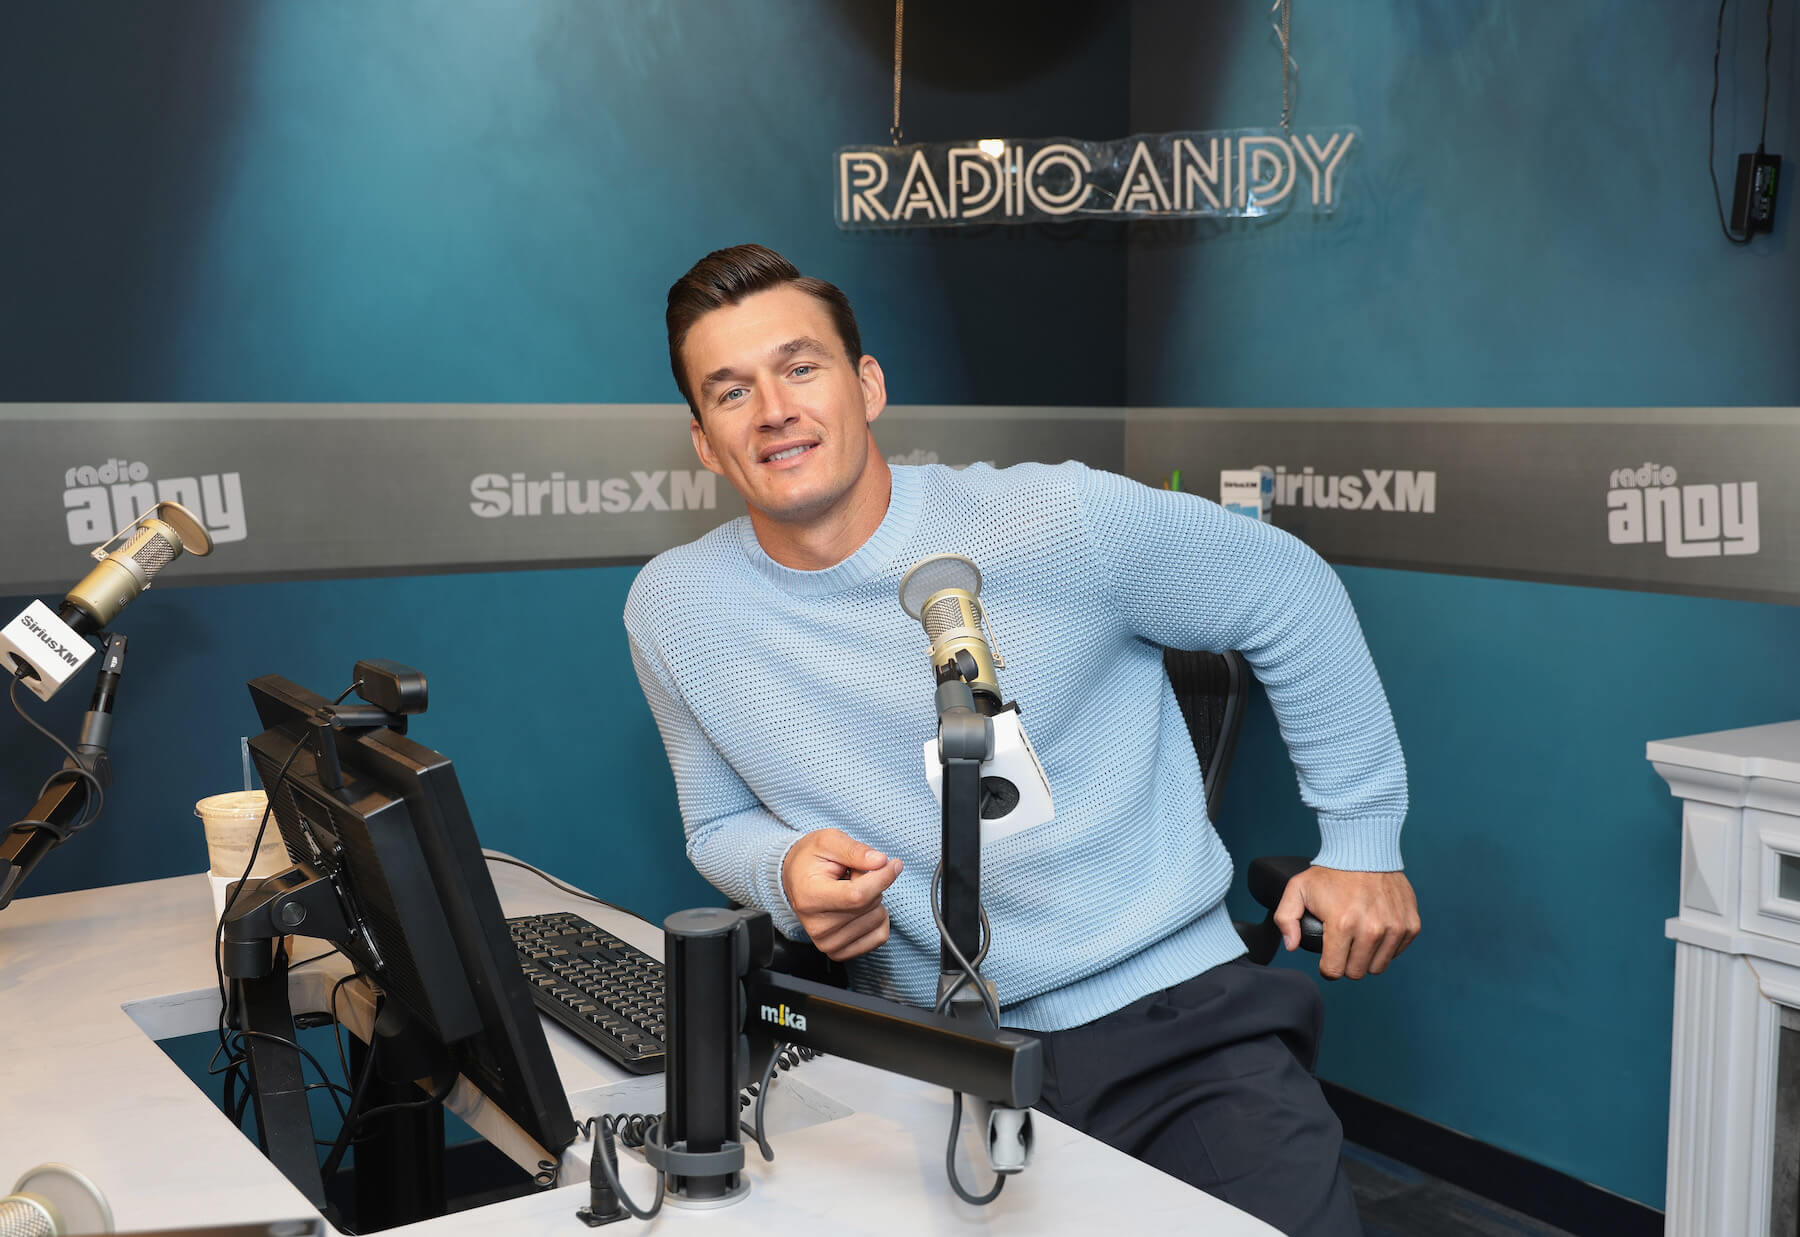 Bachelor Nation star Tyler Cameron smiling while on Radio Andy with SiriusXM. He discussed 'The Golden Bachelor' divorce.